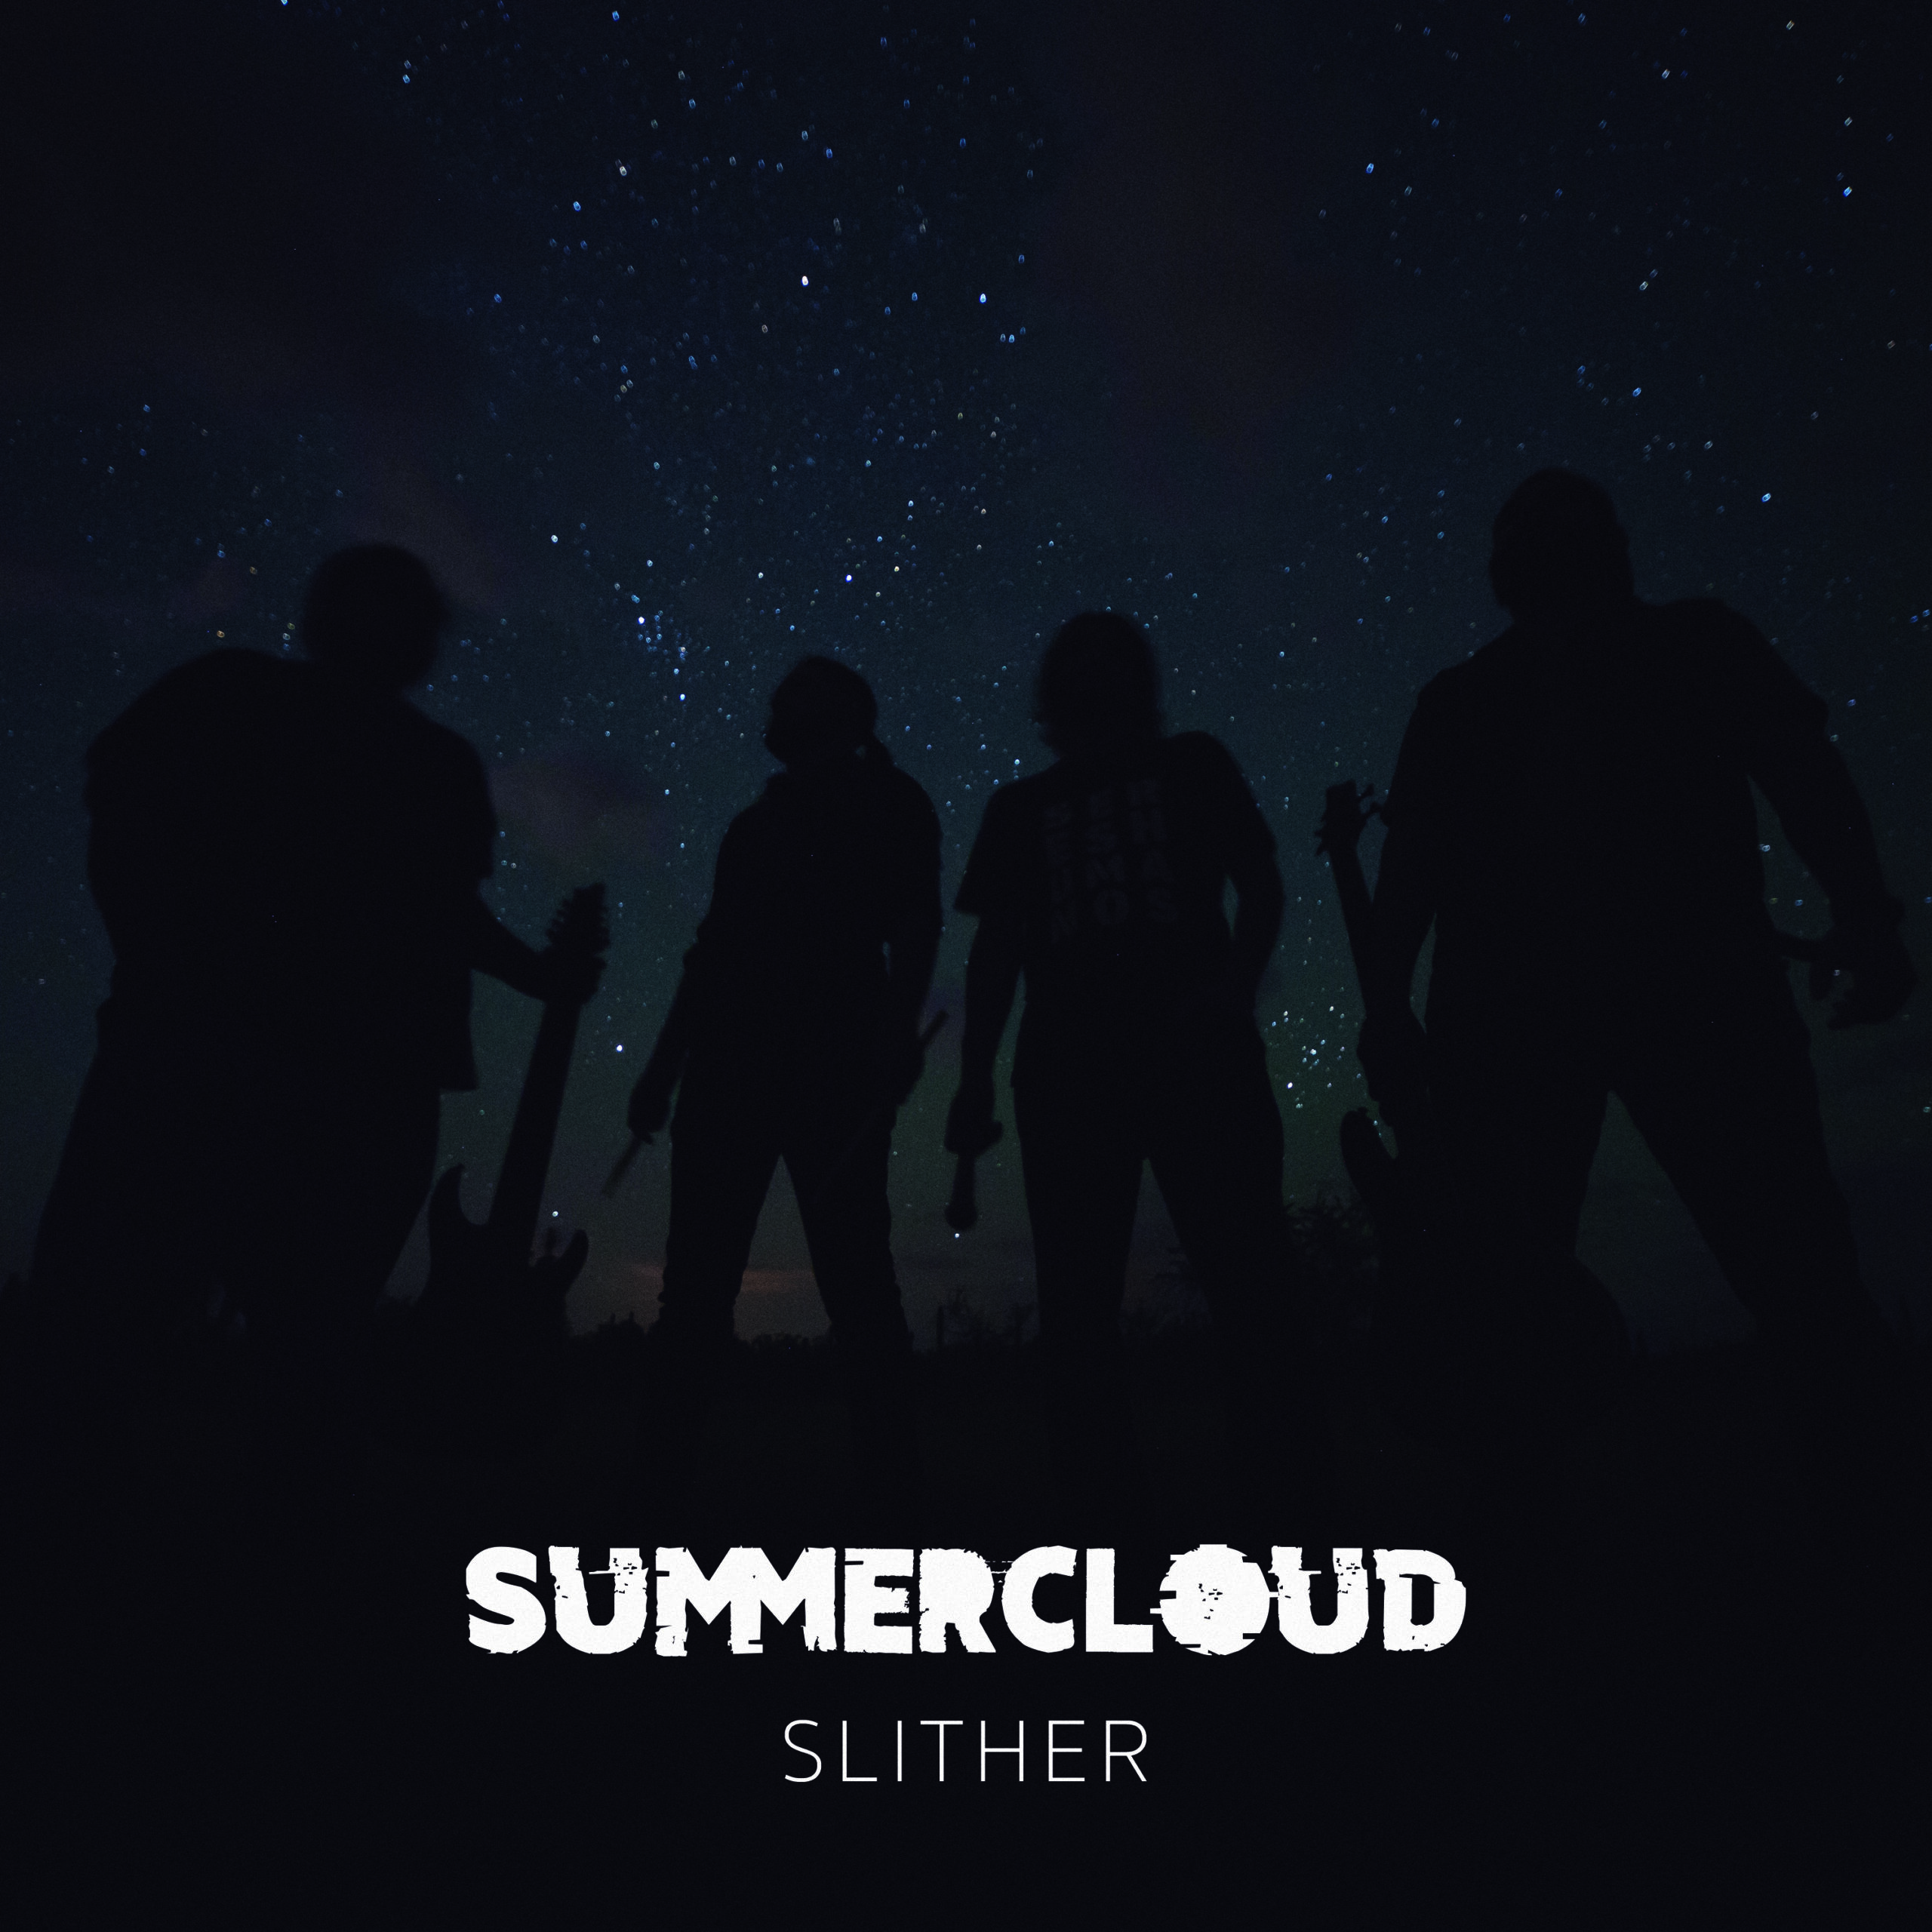 Slither - Summercloud